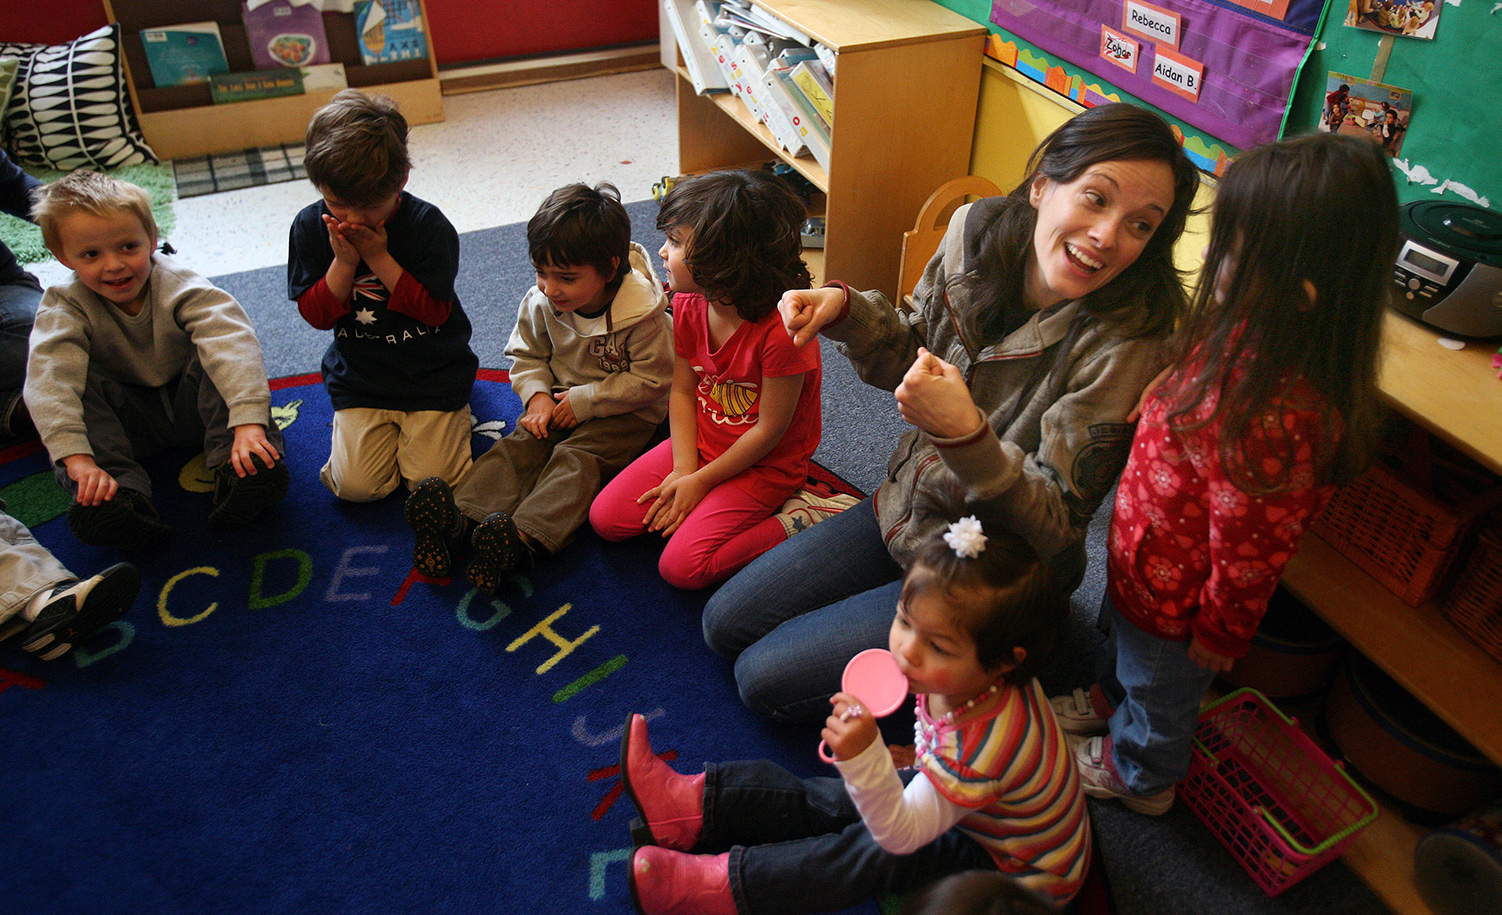 Children at the Jewish Family Preschool in San Francisco on March 13, 2009. Mark Constantini/San Francisco Chronicle via Getty Images.
